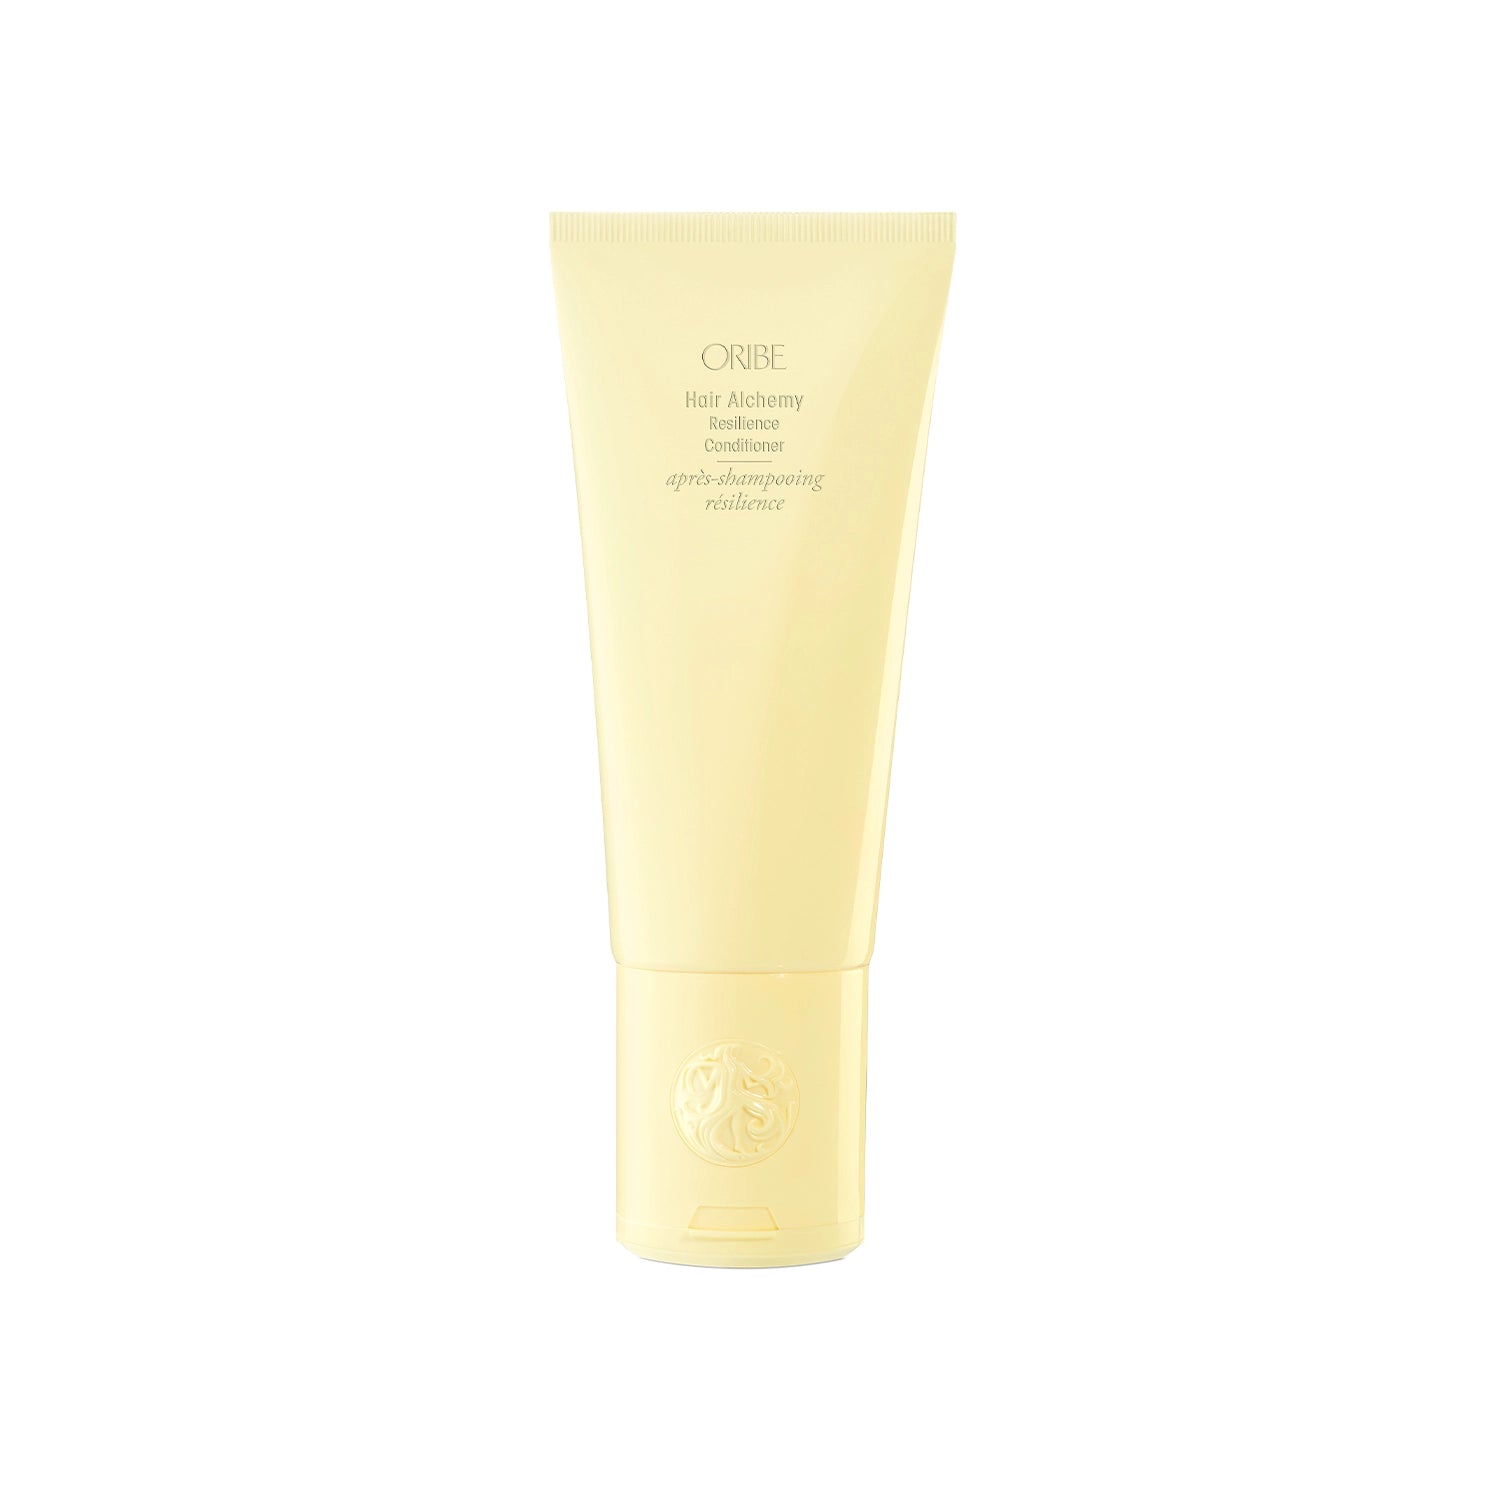 ORIBE - Hair Alchemy Resilience Conditioner